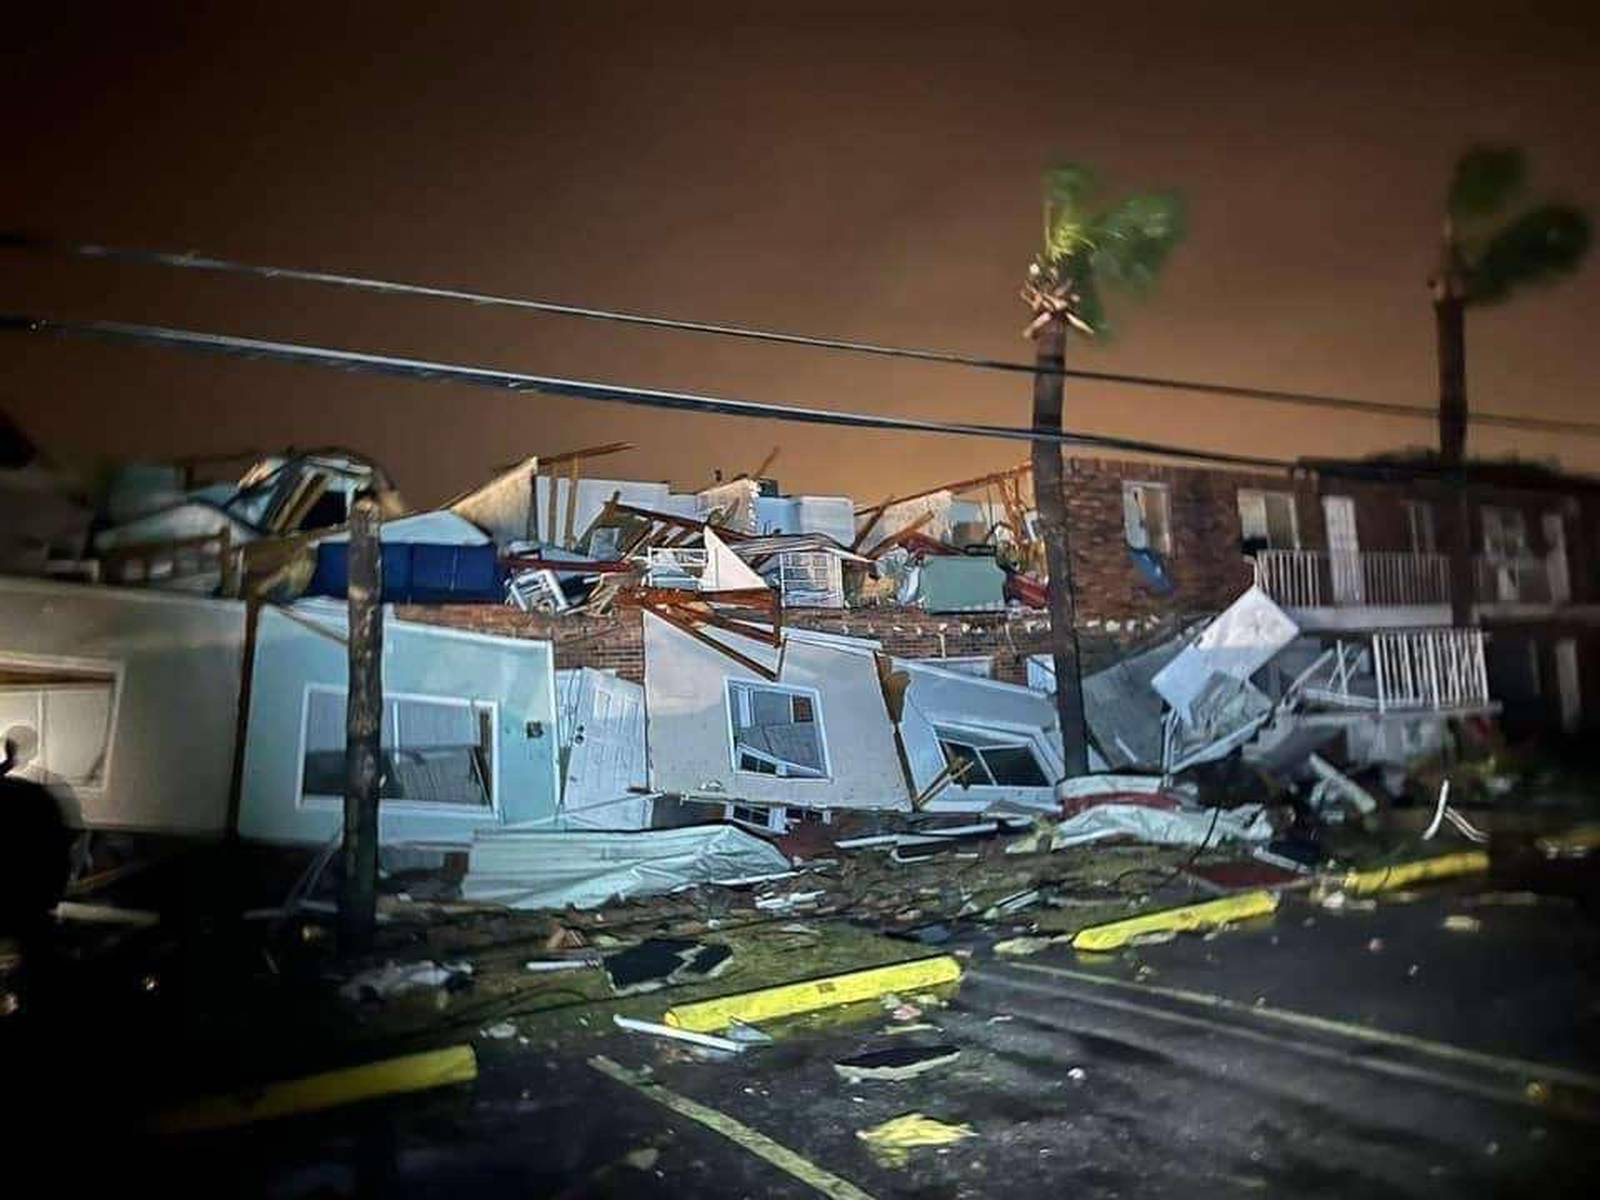 VIDEO Tornado damage in Panama City emerges as drones hit the sky